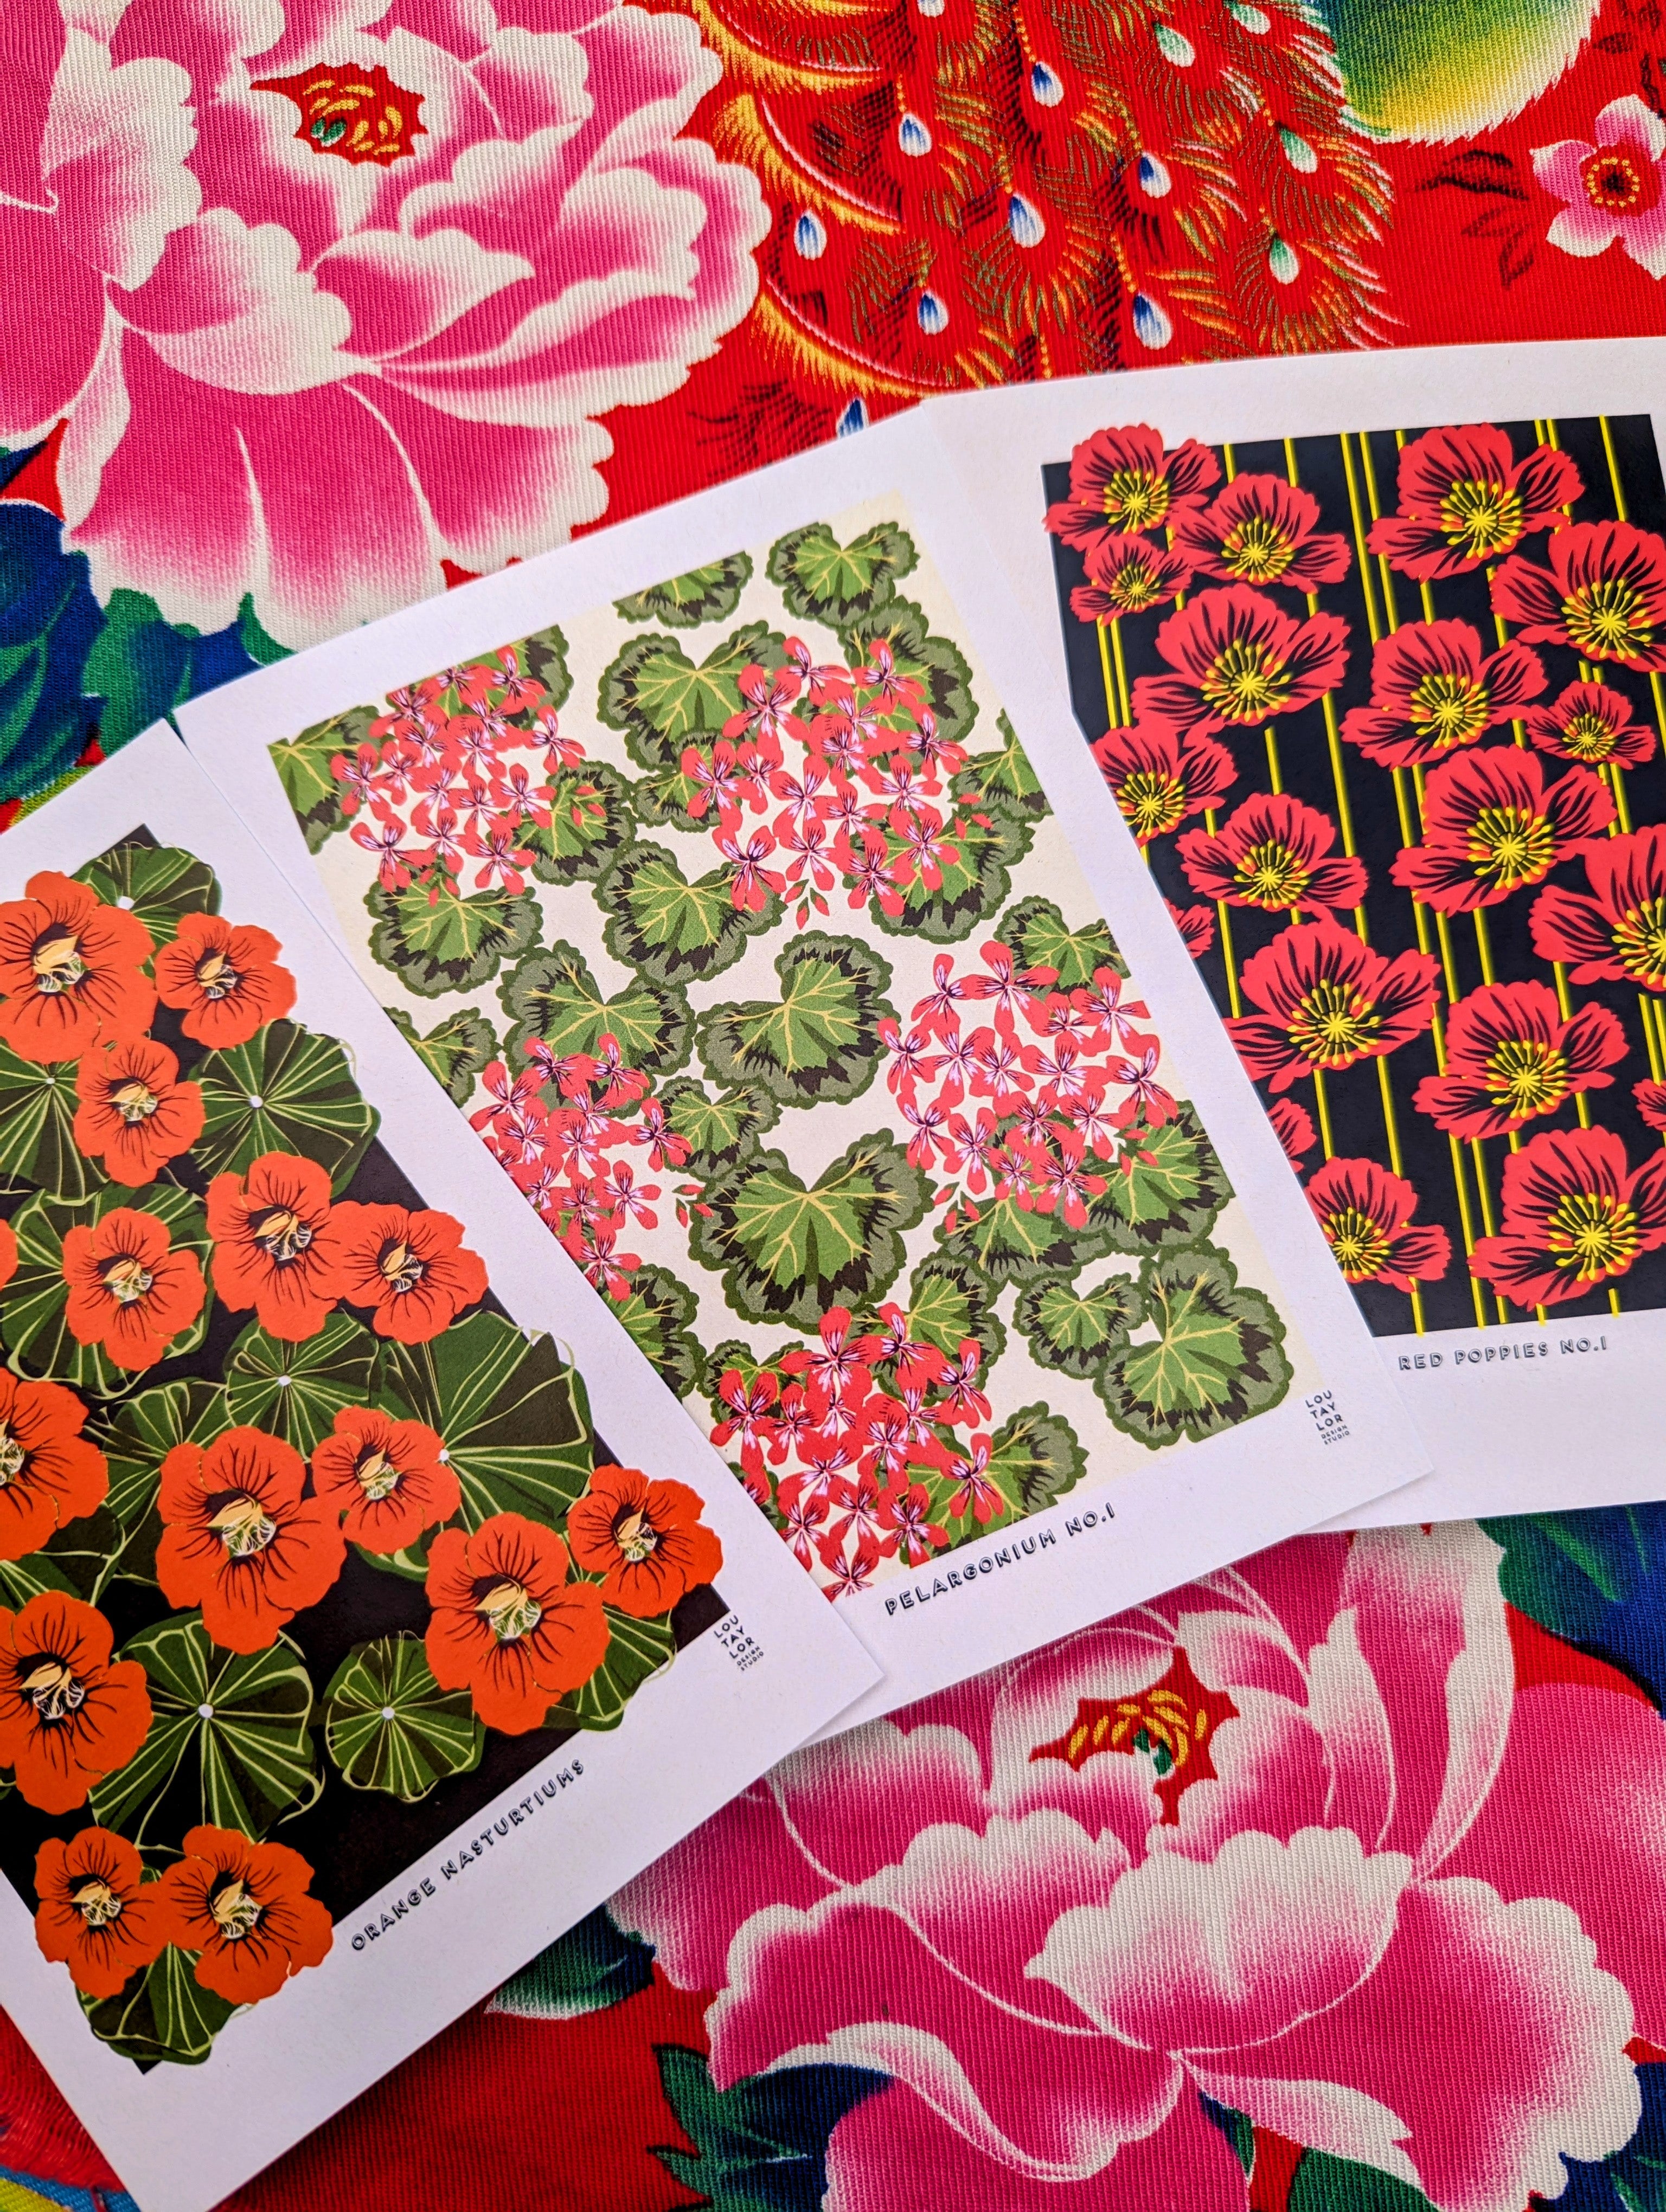 Seed packet inspired florals by Lou